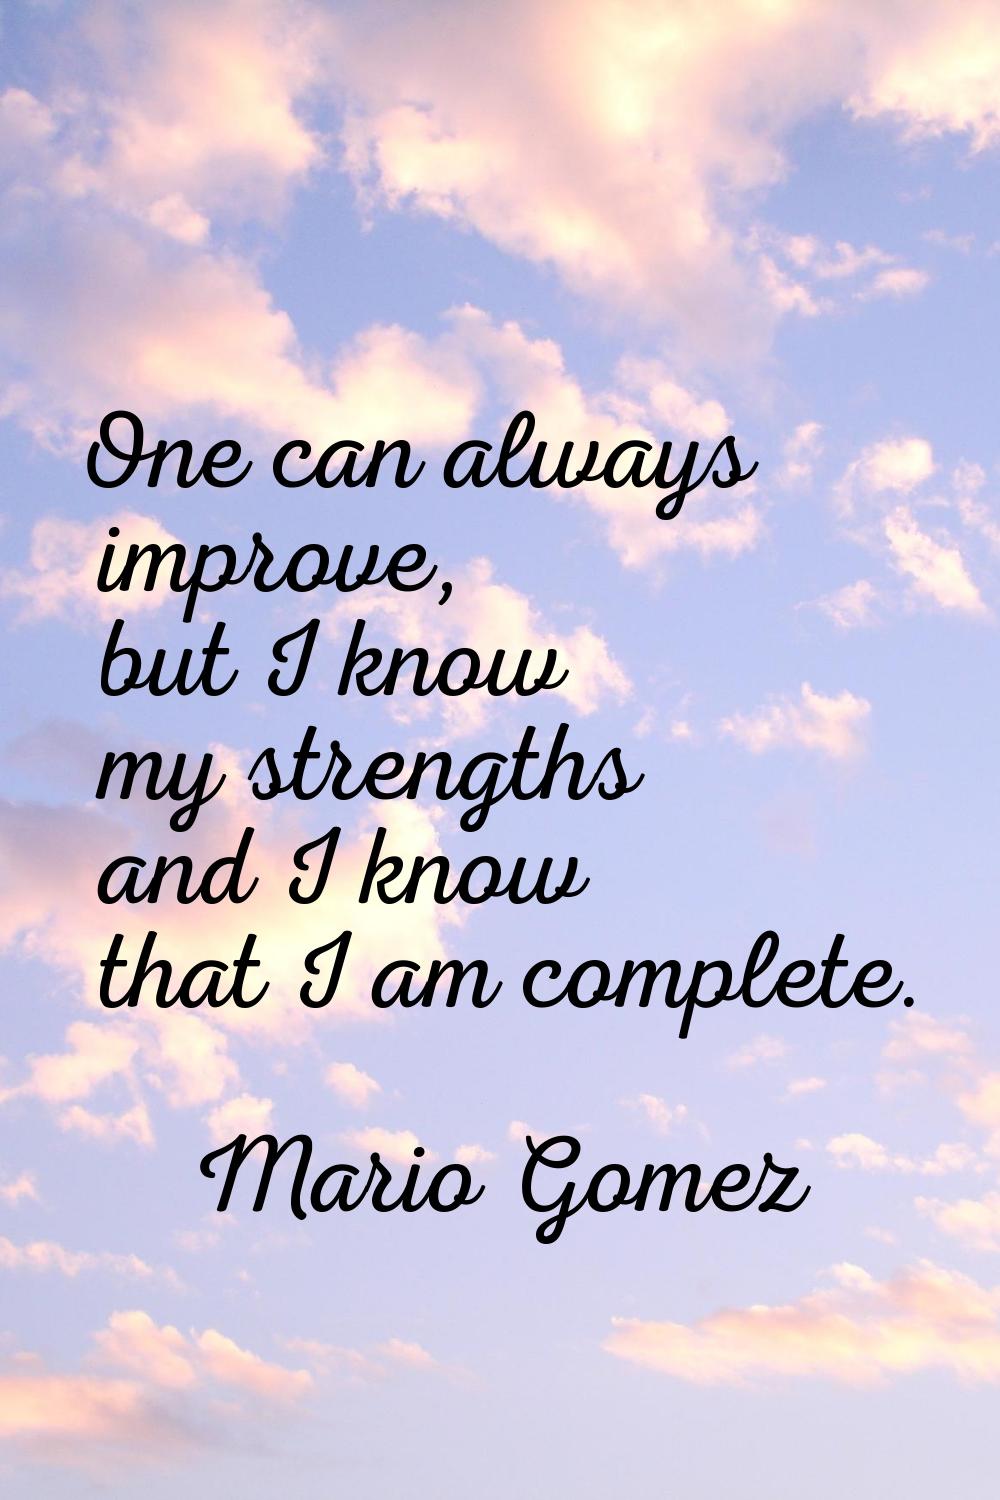 One can always improve, but I know my strengths and I know that I am complete.